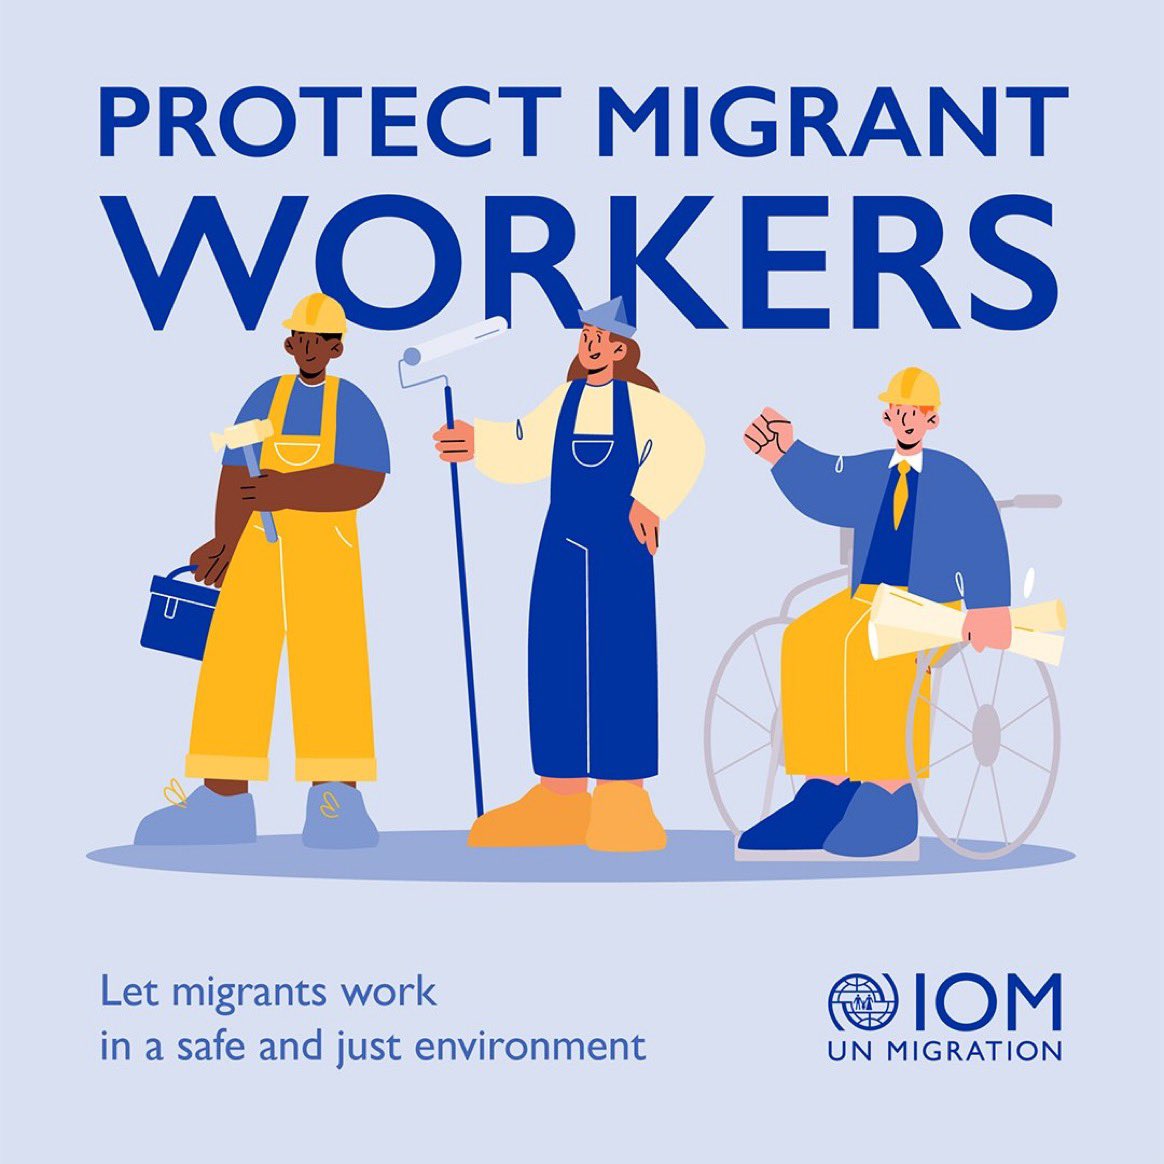 Let's renew our commitment to safeguarding the rights of #migrants. Every worker deserves respect, fair treatment, and safe working conditions, including migrants. #LabourDay